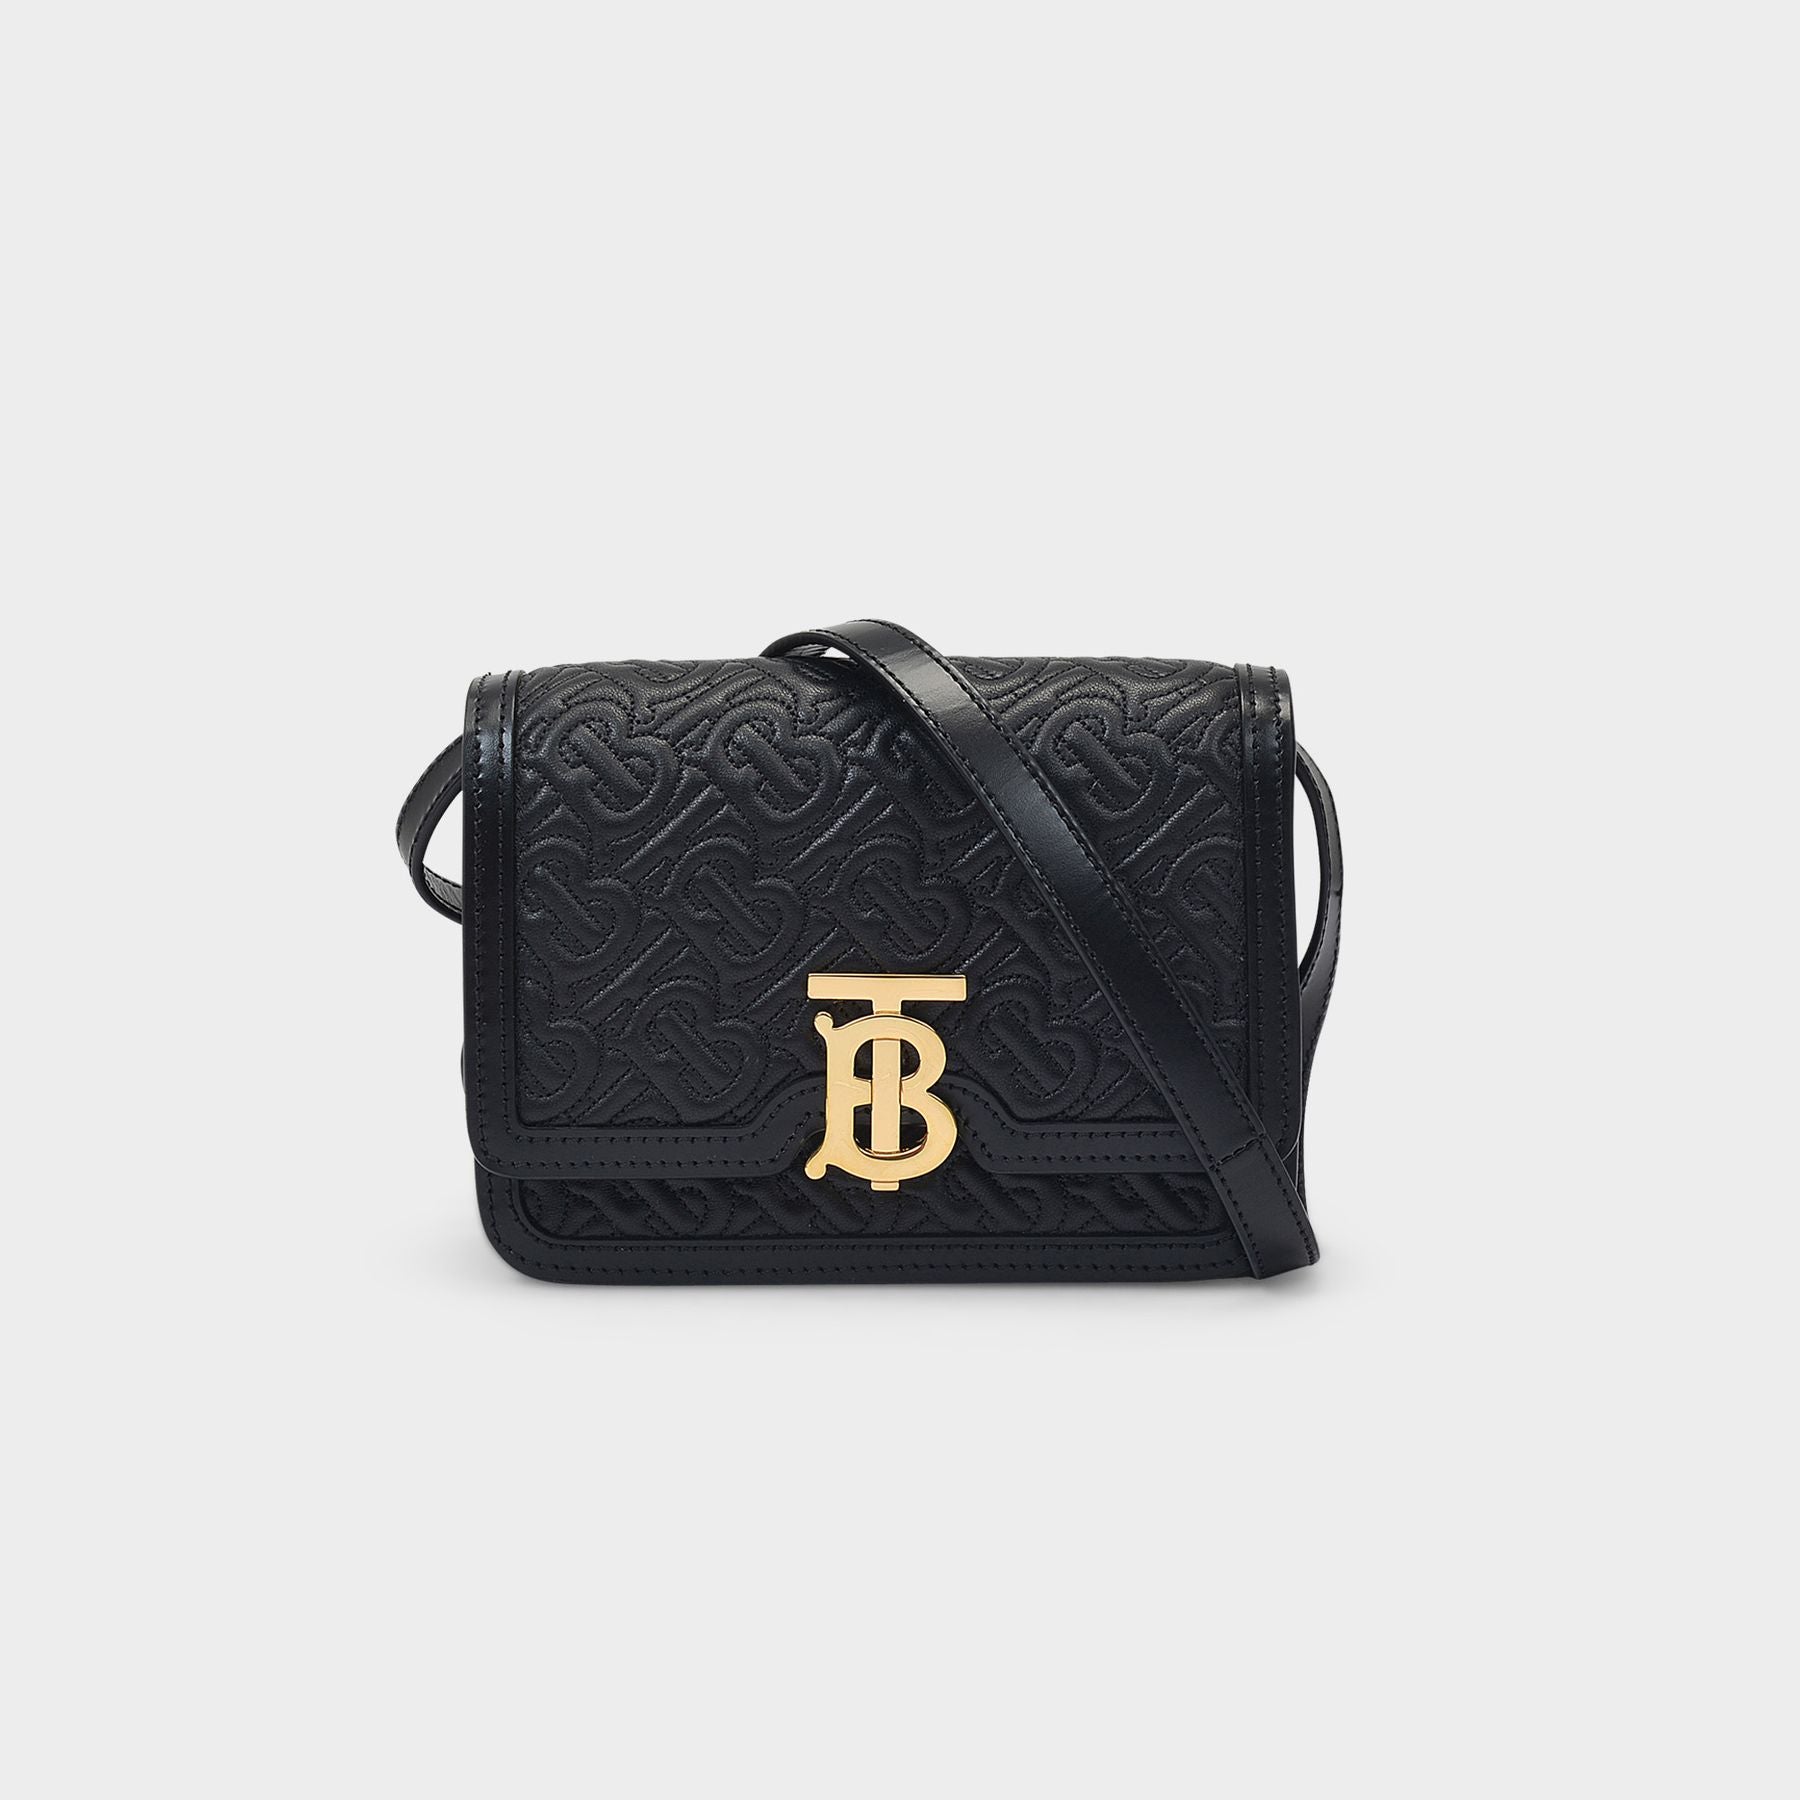 Burberry Small Quilted Monogram TB Bag